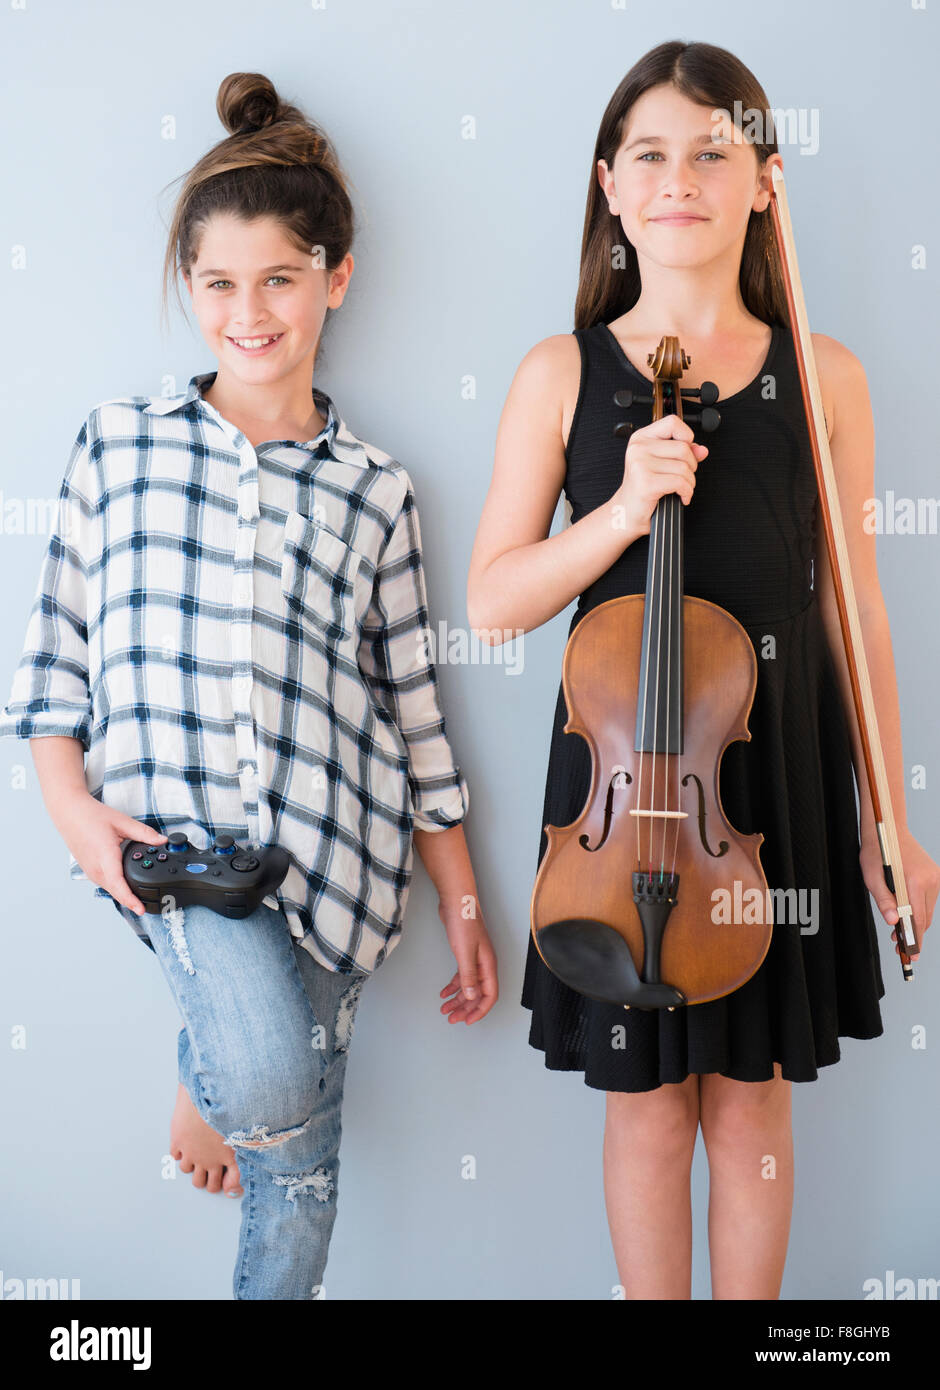 Caucasian twin sisters with opposite hobbies Stock Photo